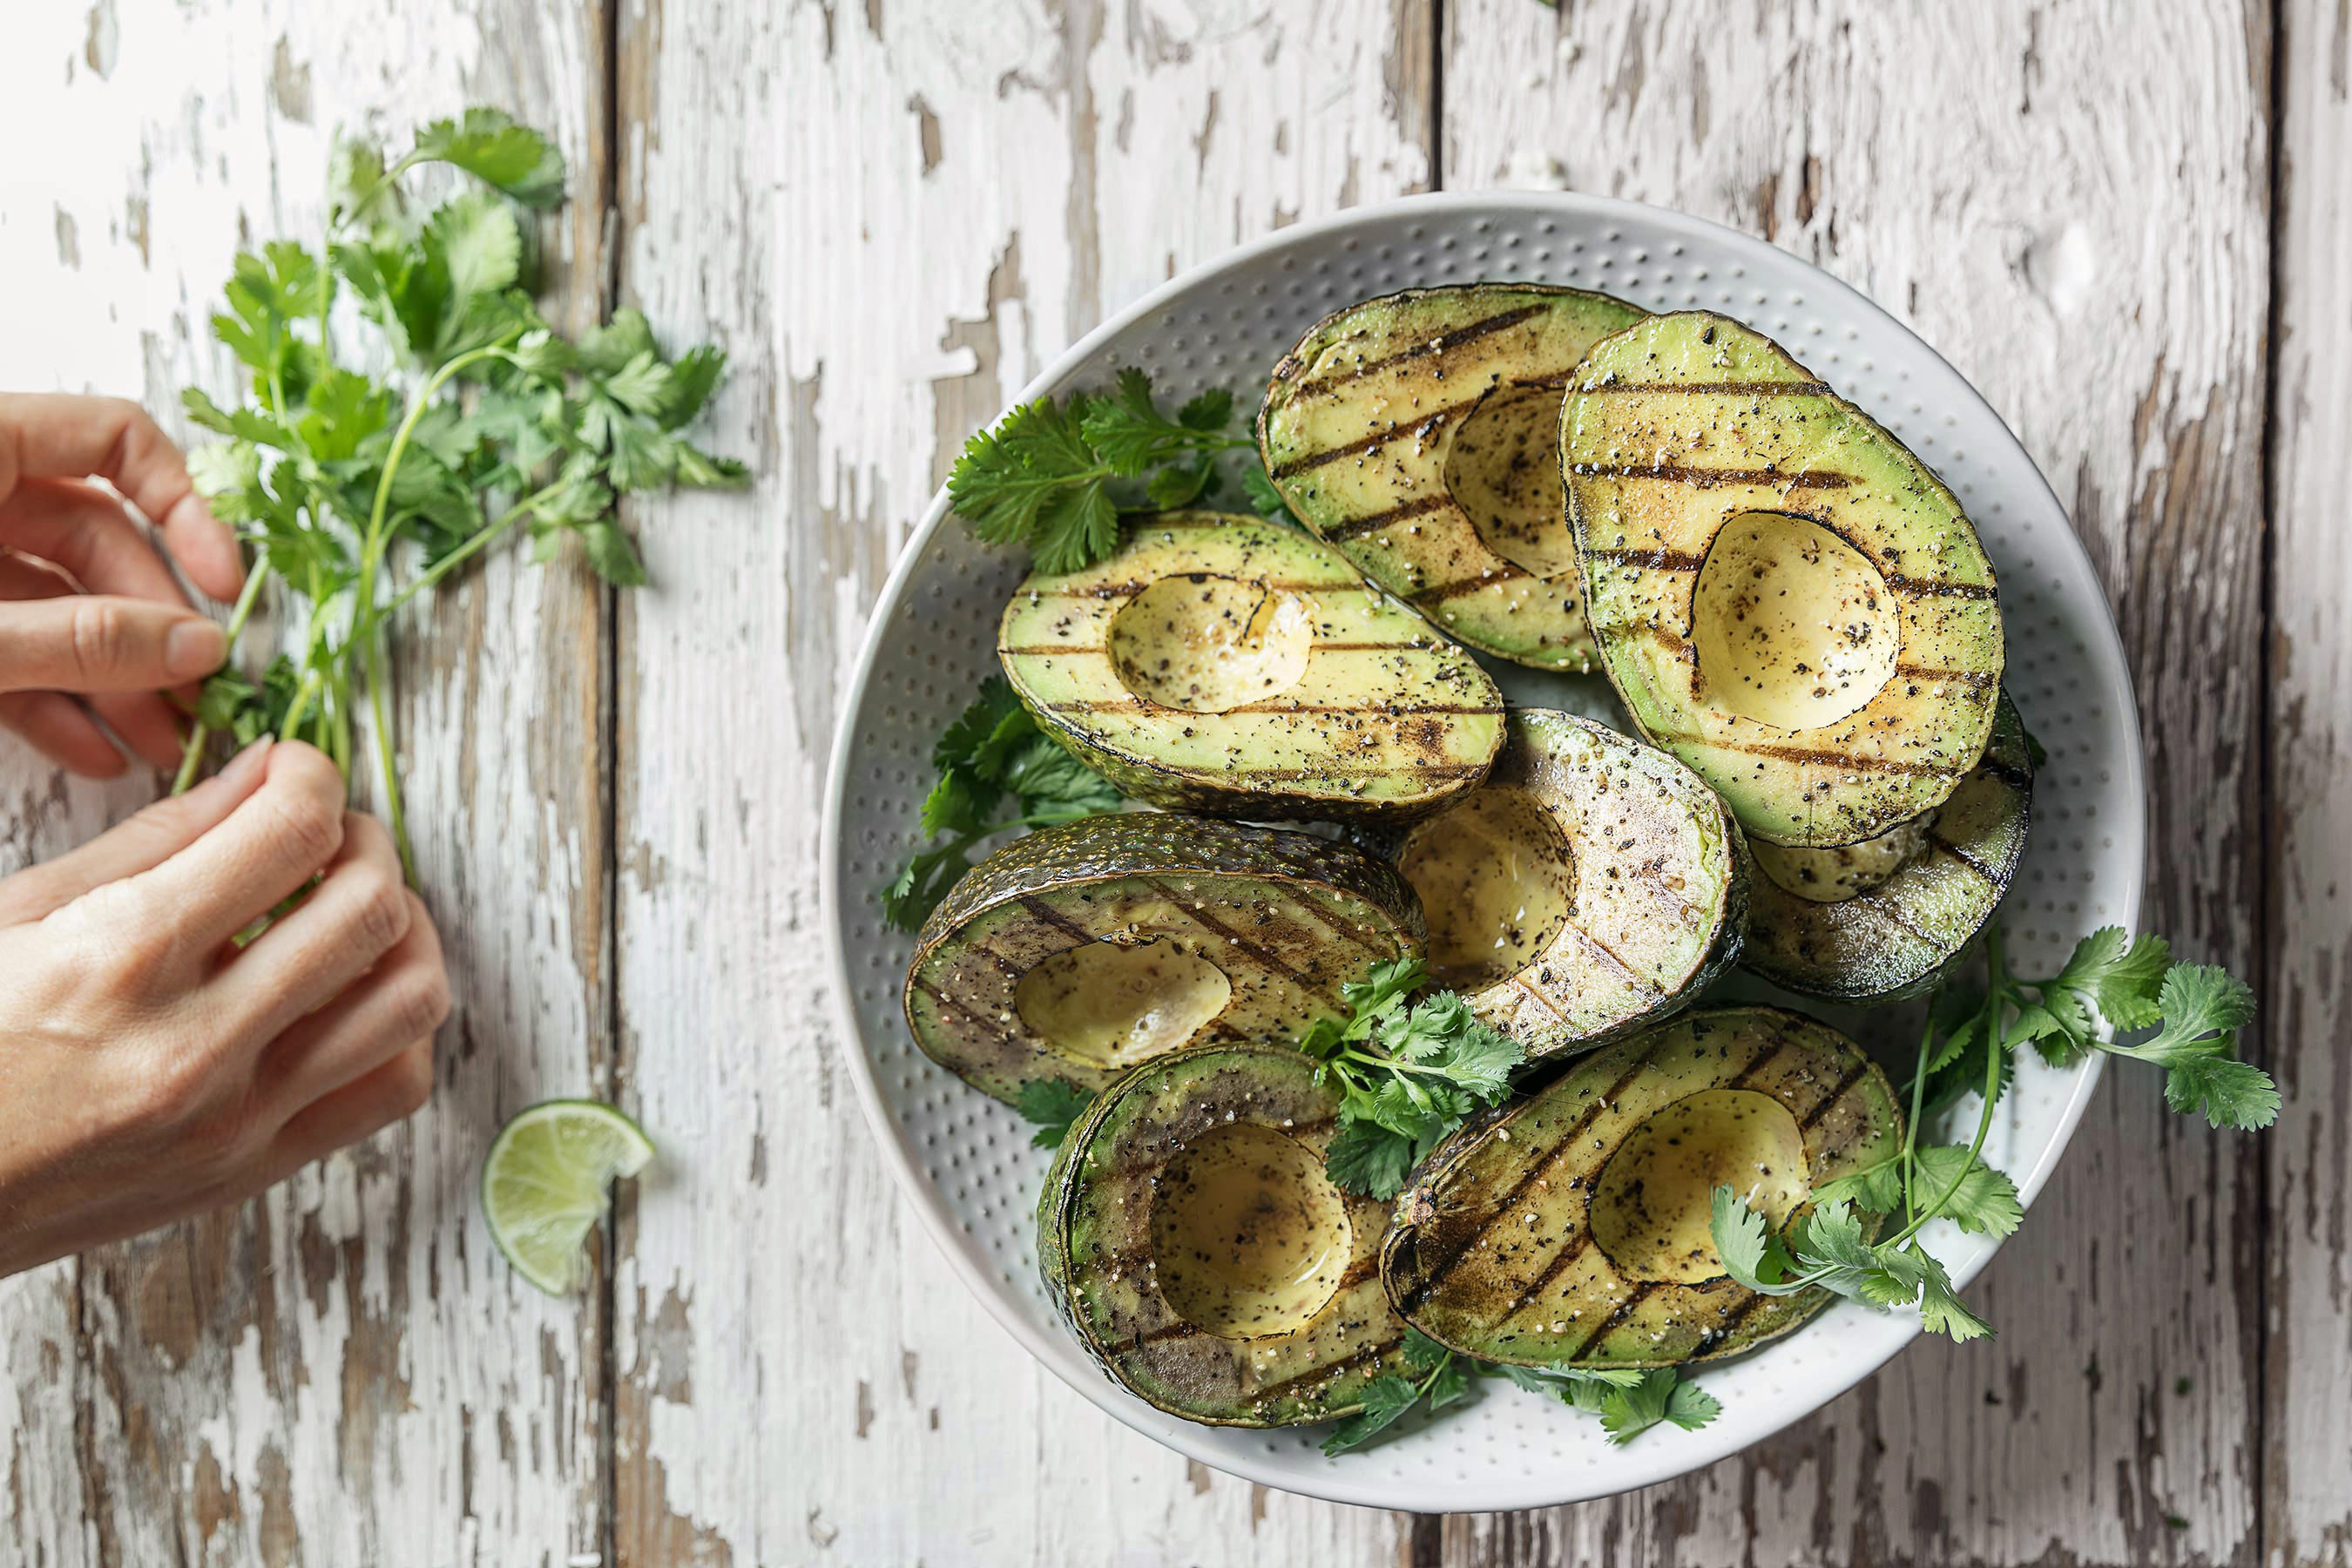 Glanger Photography | Halved Grilled Avocados with hands placing cilantro and lime